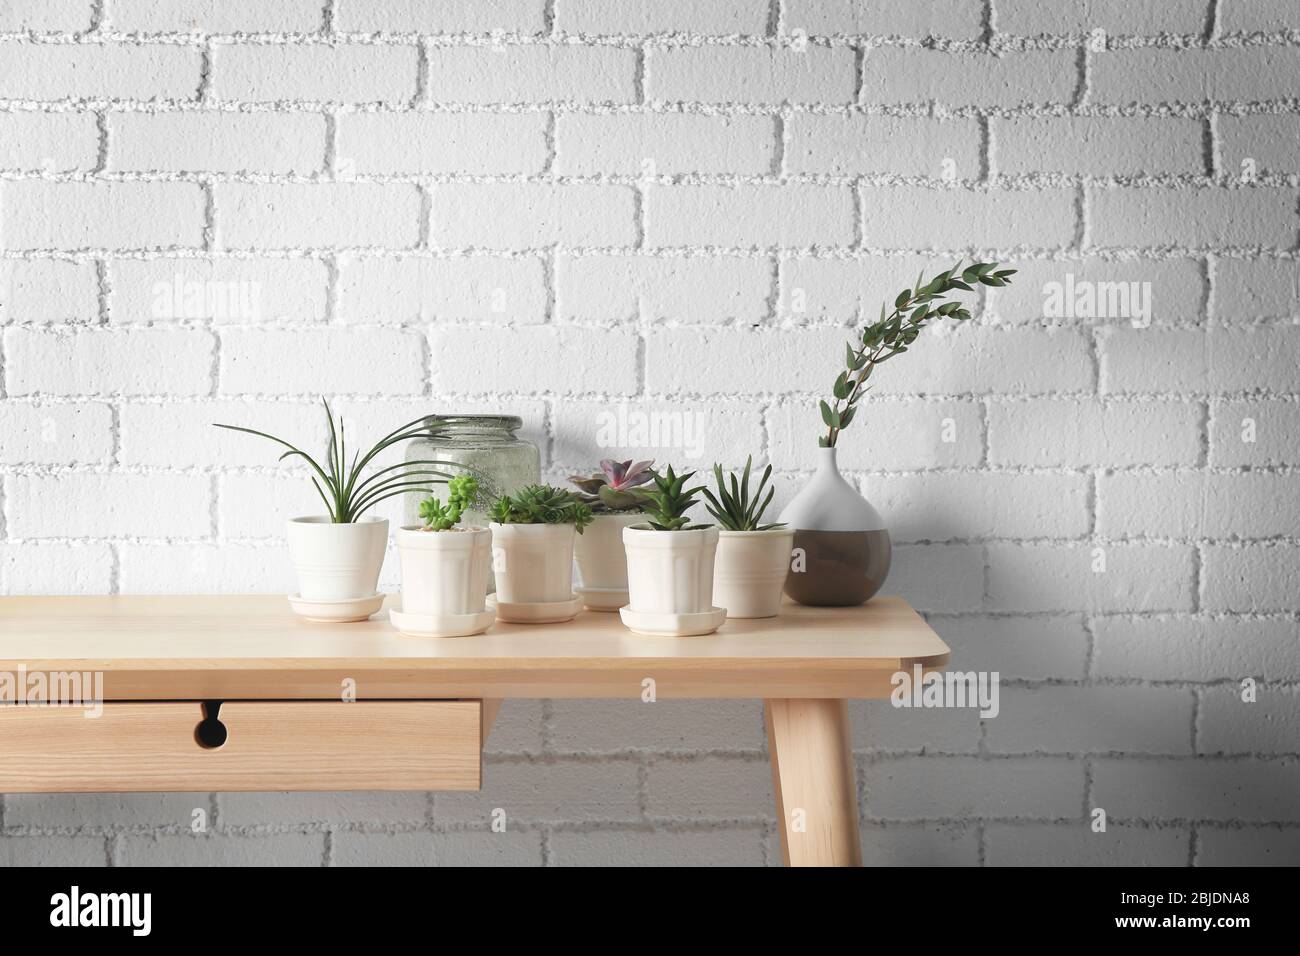 Succulents on wooden table on white brick wall background Stock Photo